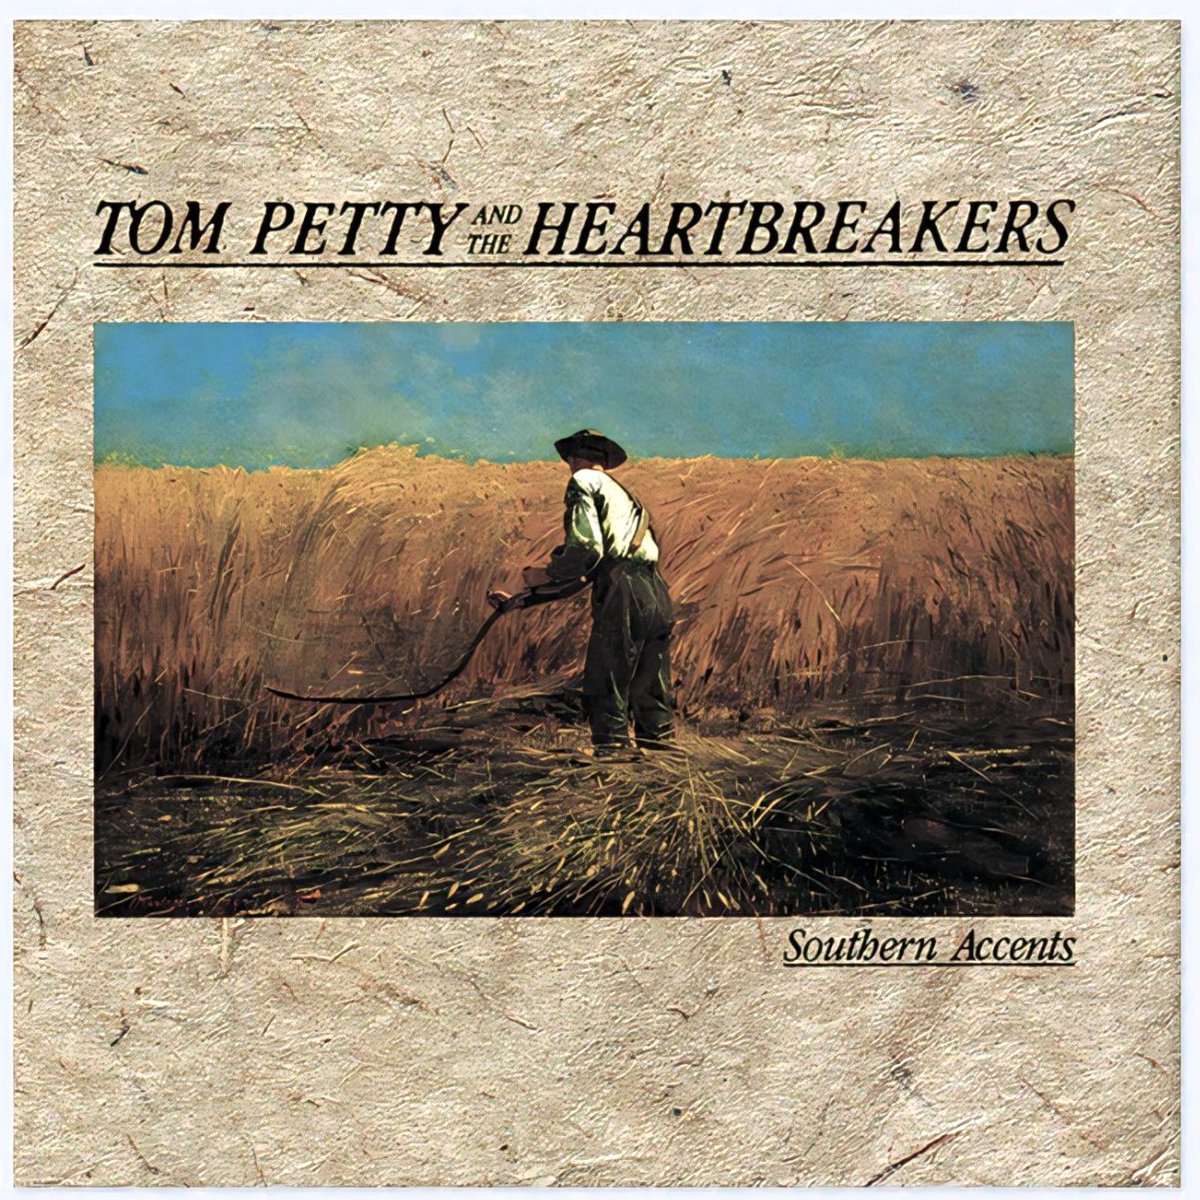 Tom Petty and the Heartbreakers
Southern Accents

26 March 1985

@NewWaveAndPunk #tompetty #music #80s #heartlandrock #records #vinylalbum #vinylrecords #vinylcollection